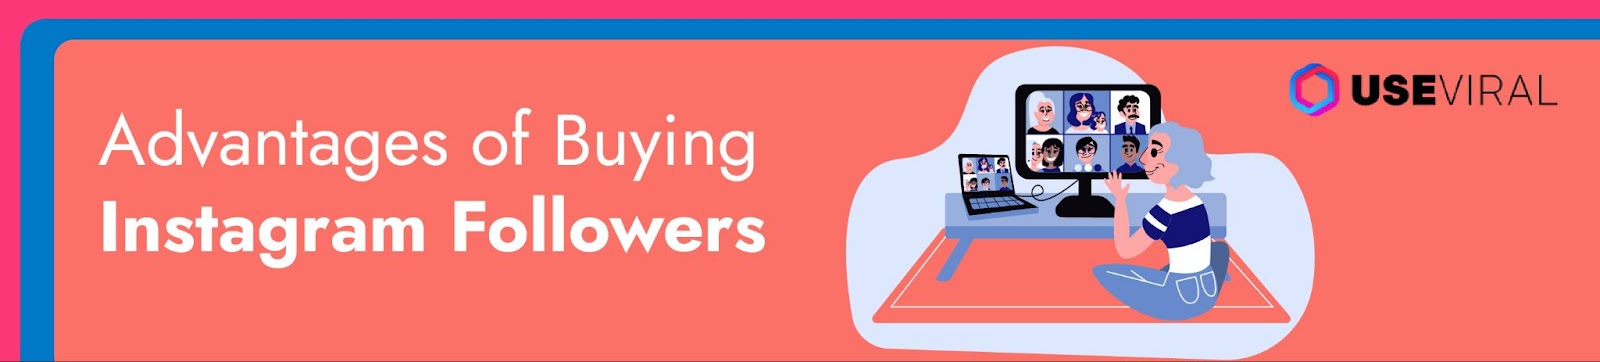 Advantages of Buying Instagram Followers